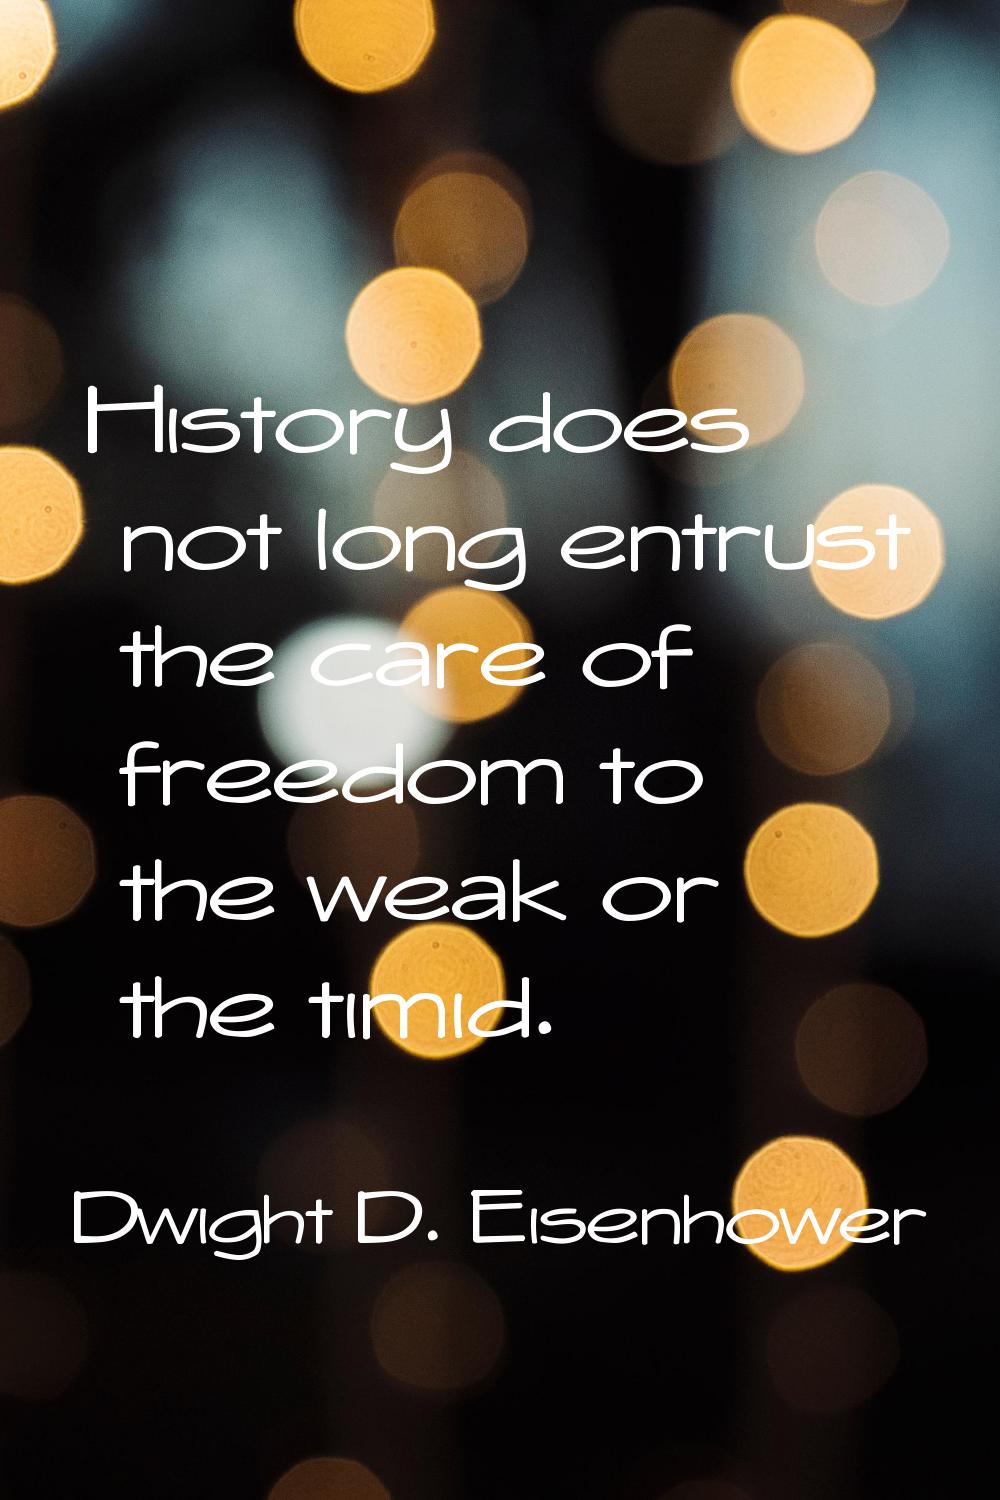 History does not long entrust the care of freedom to the weak or the timid.